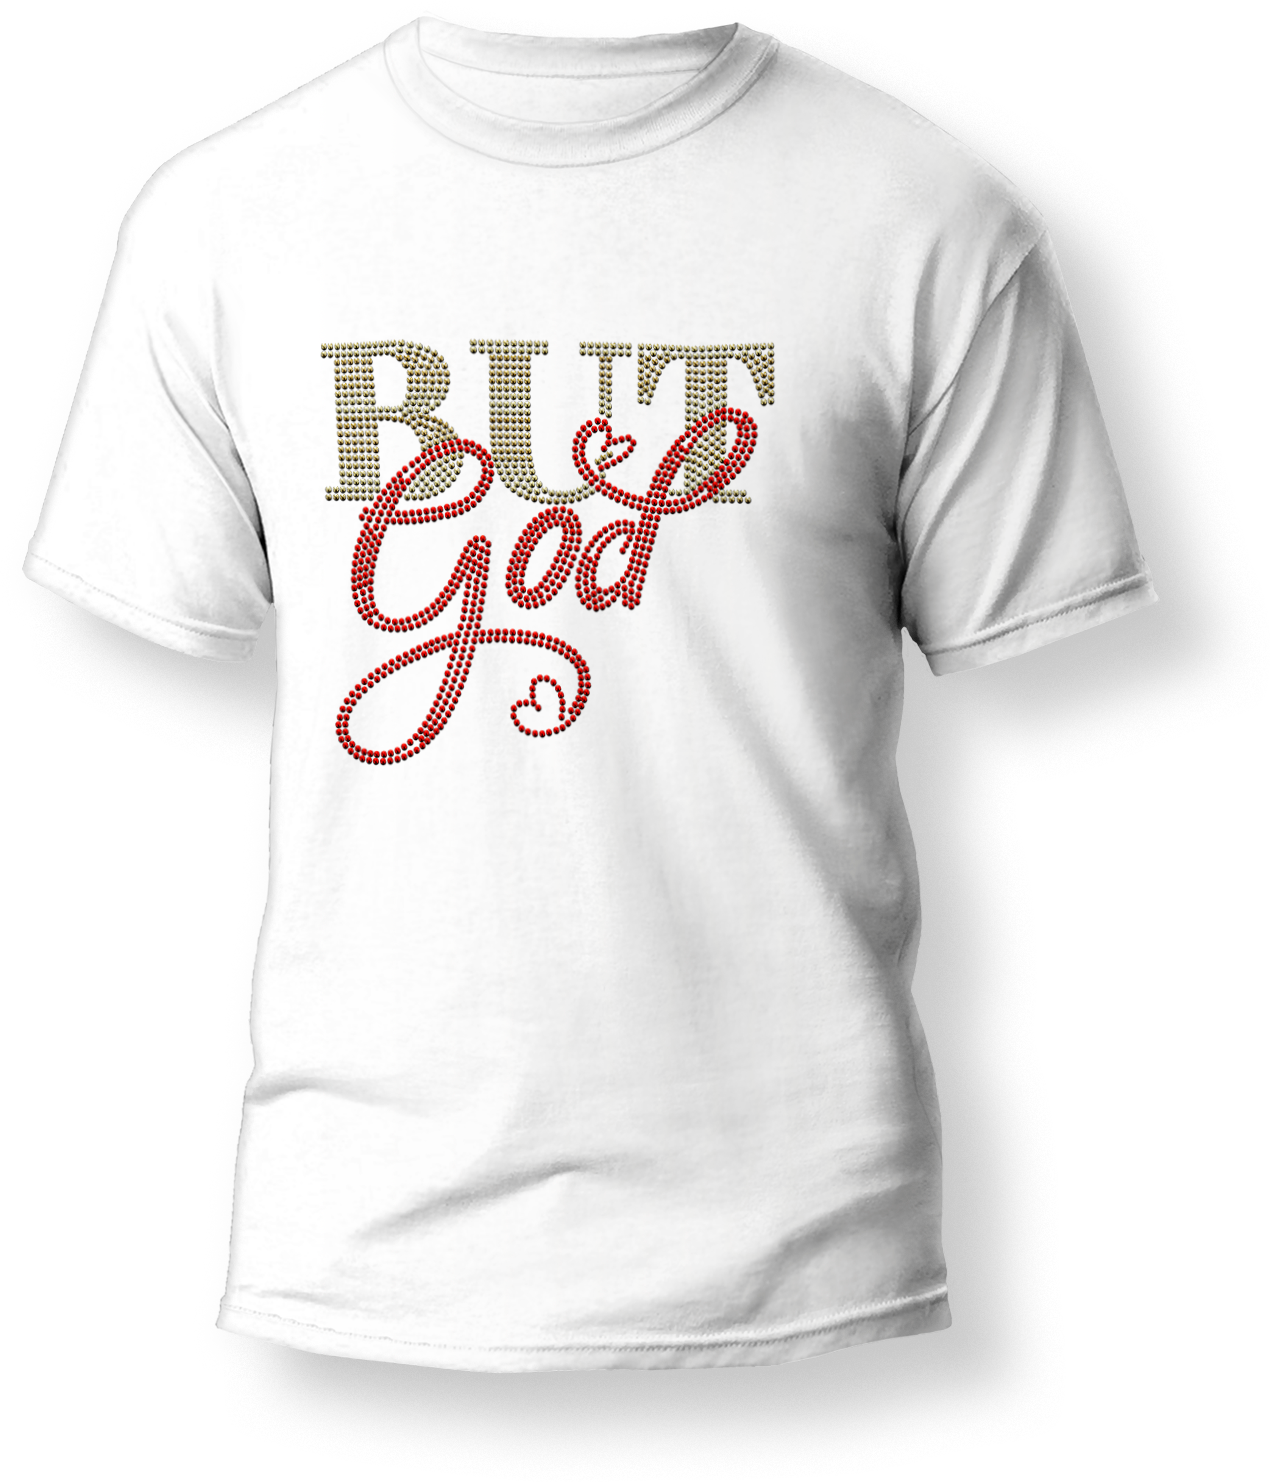 Our "But God" Rhinestone T-Shirts are a beautiful expression of faith and hope, available in two timeless colors, black and white. What sets these shirts apart is that you get to choose your two favorite rhinestone colors to accentuate the message, making each shirt a unique and personal reflection of your beliefs.